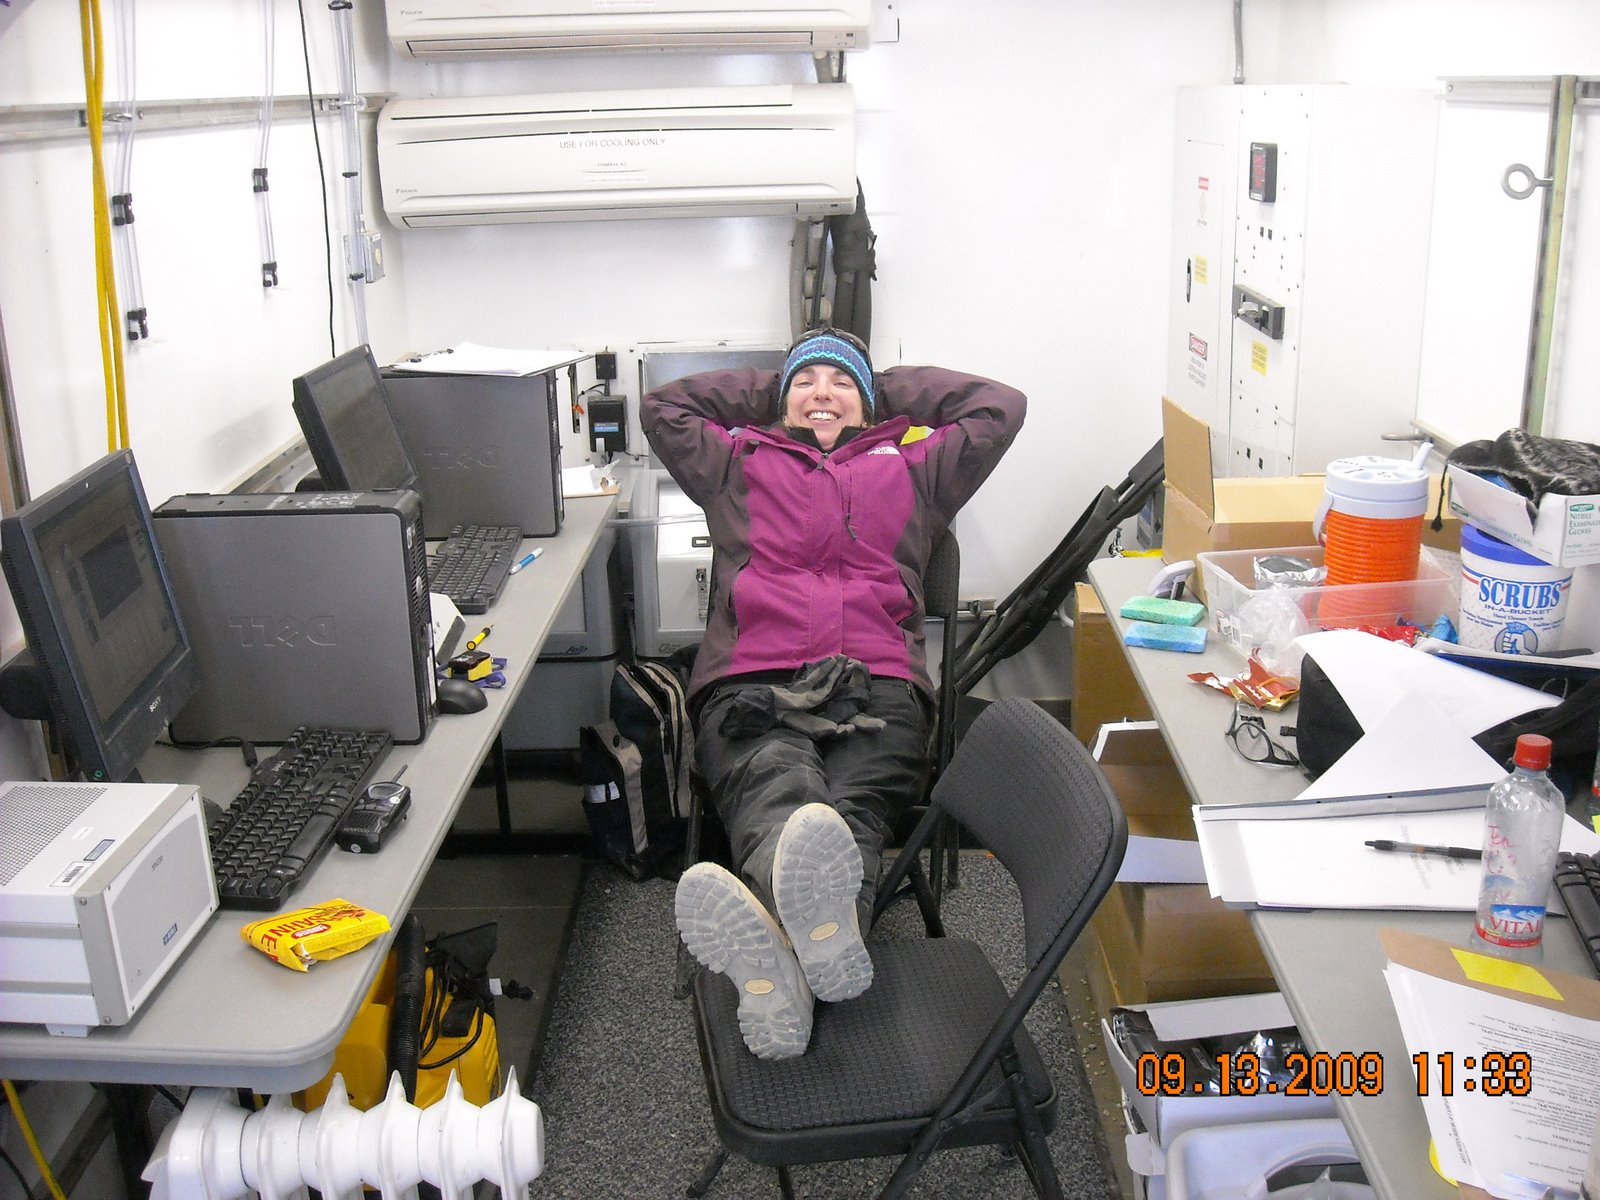 Jen Delamere kicks back in a chair with her hands behind her head.